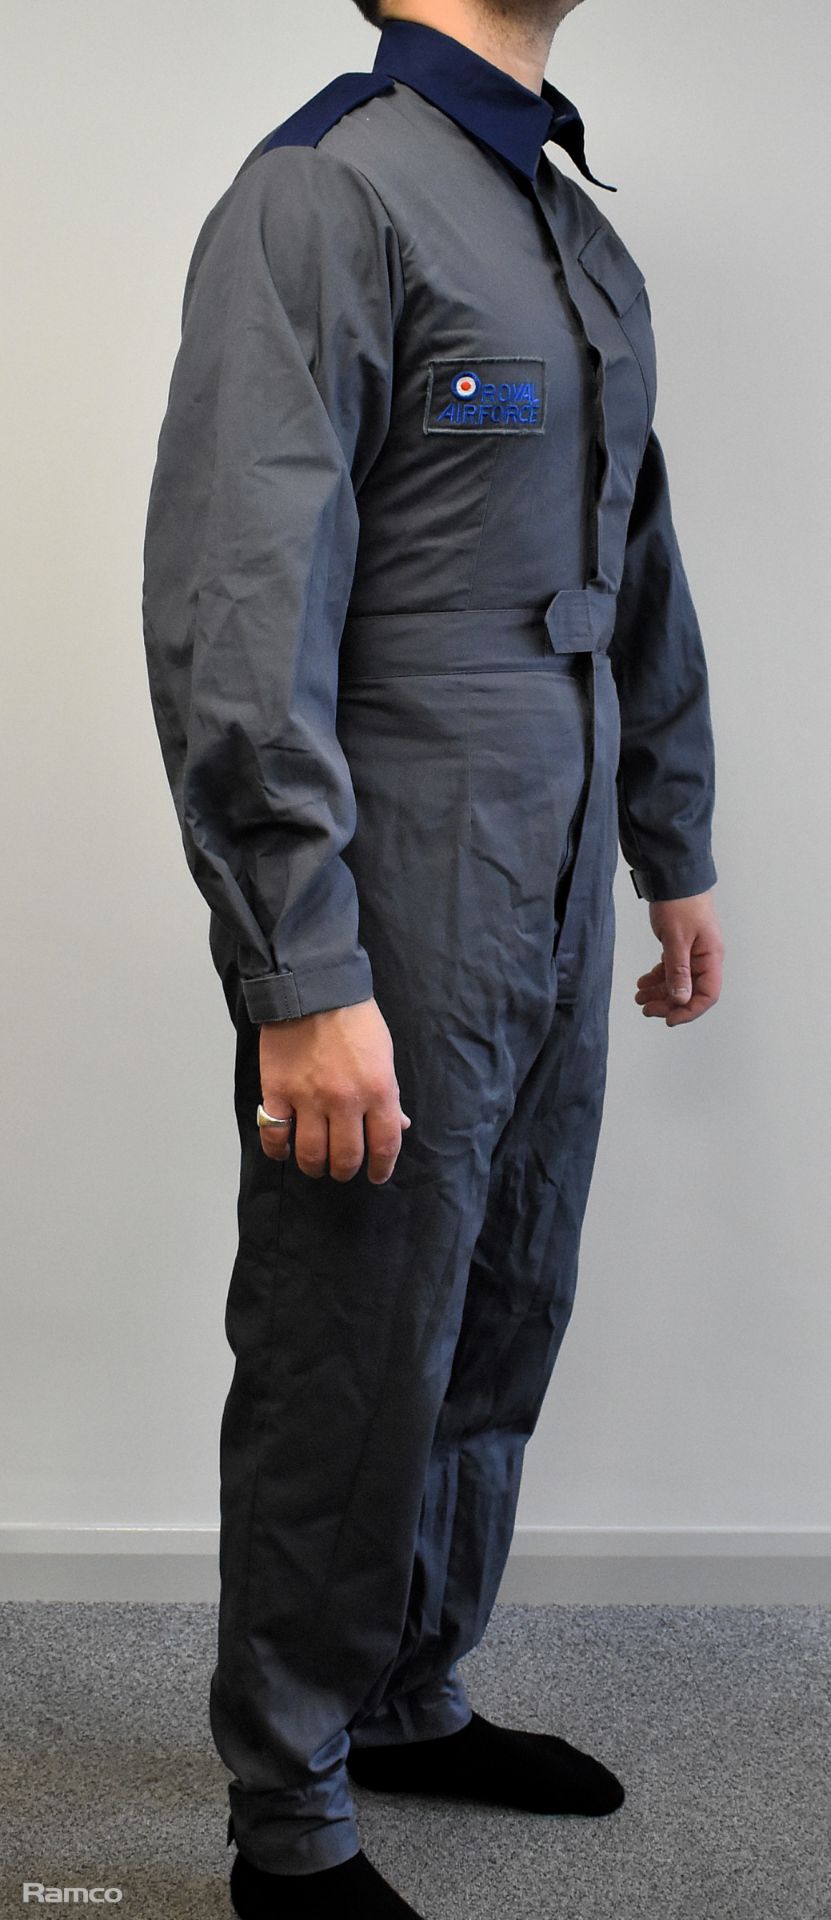 100x British Forces overalls - Blue / Grey - mixed sizes - Image 4 of 9